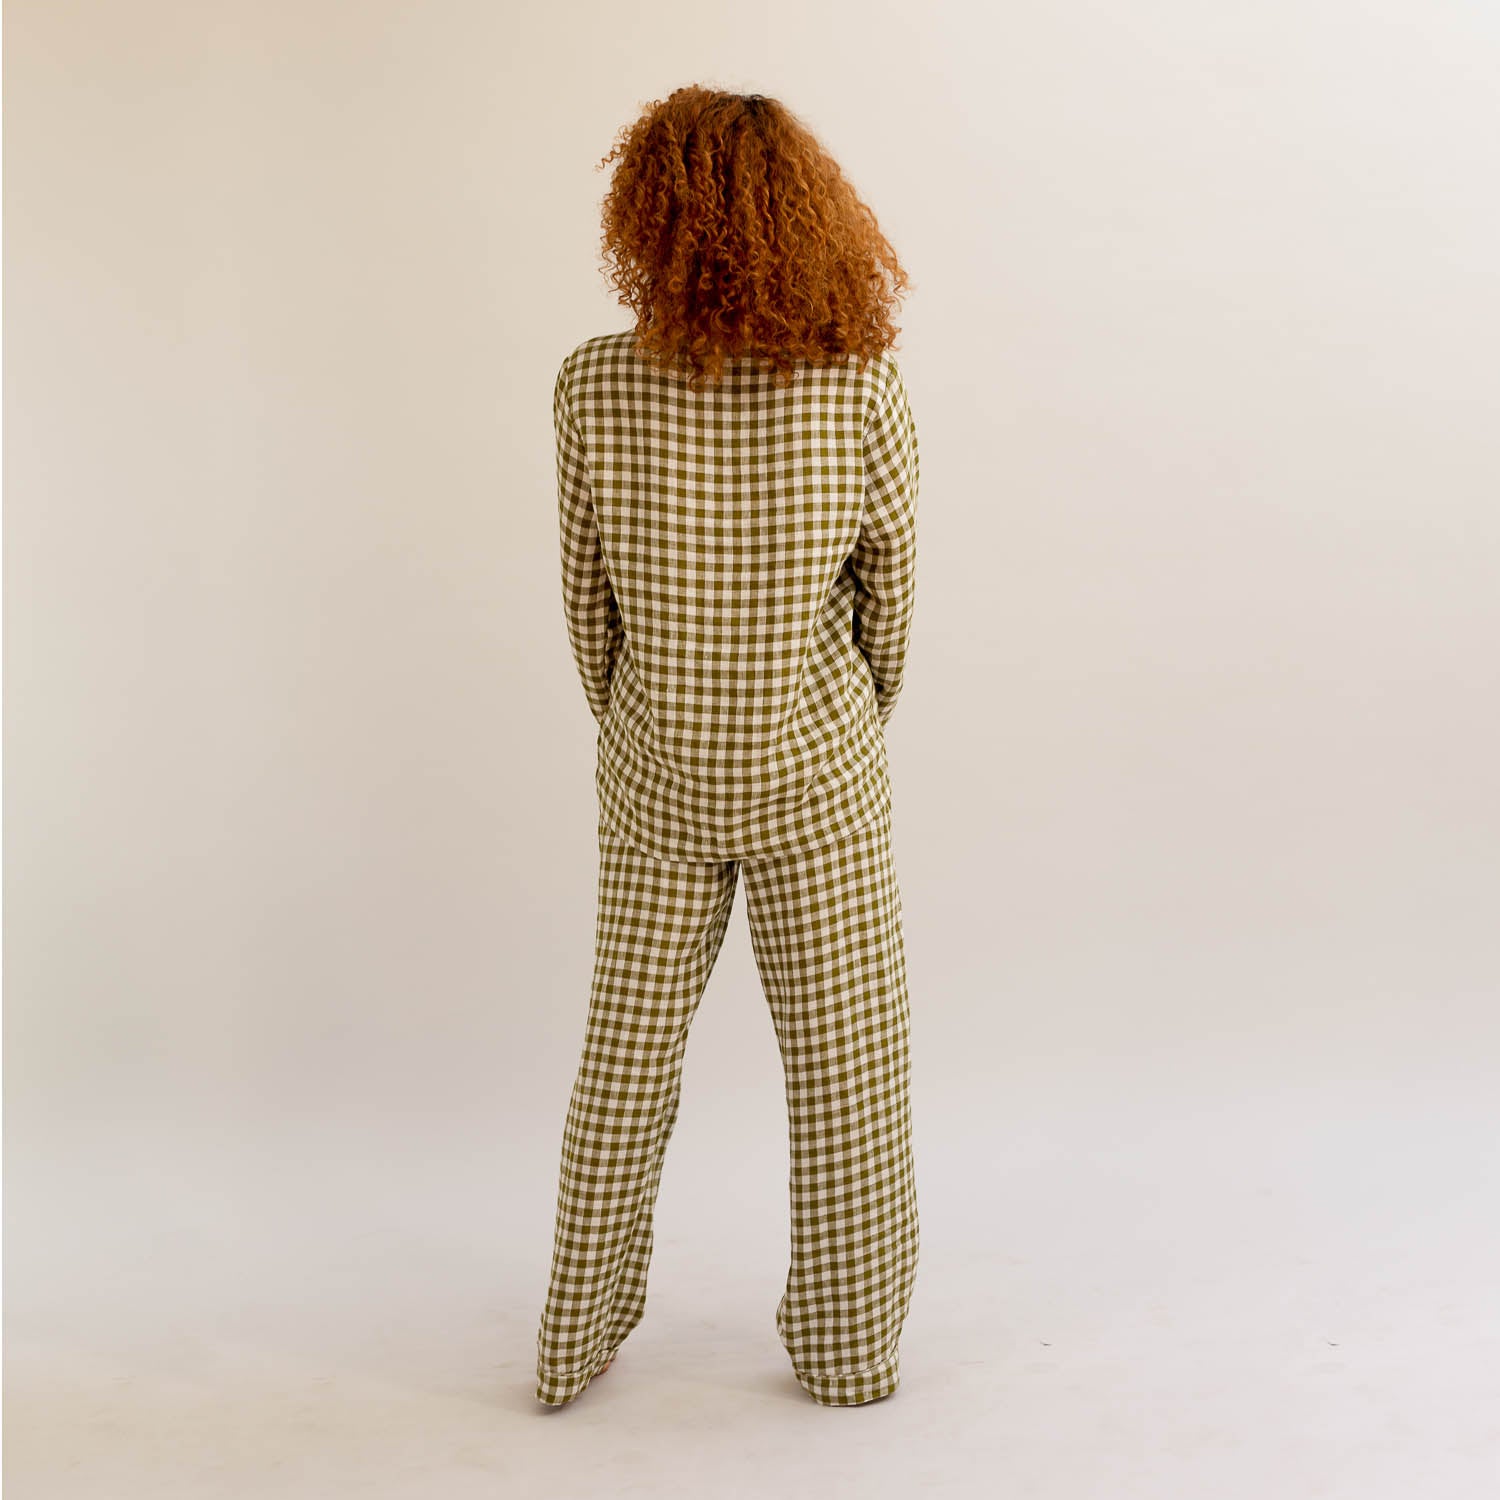 Botanical Green Gingham Linen Pyjama Trousers - Piglet in Bed